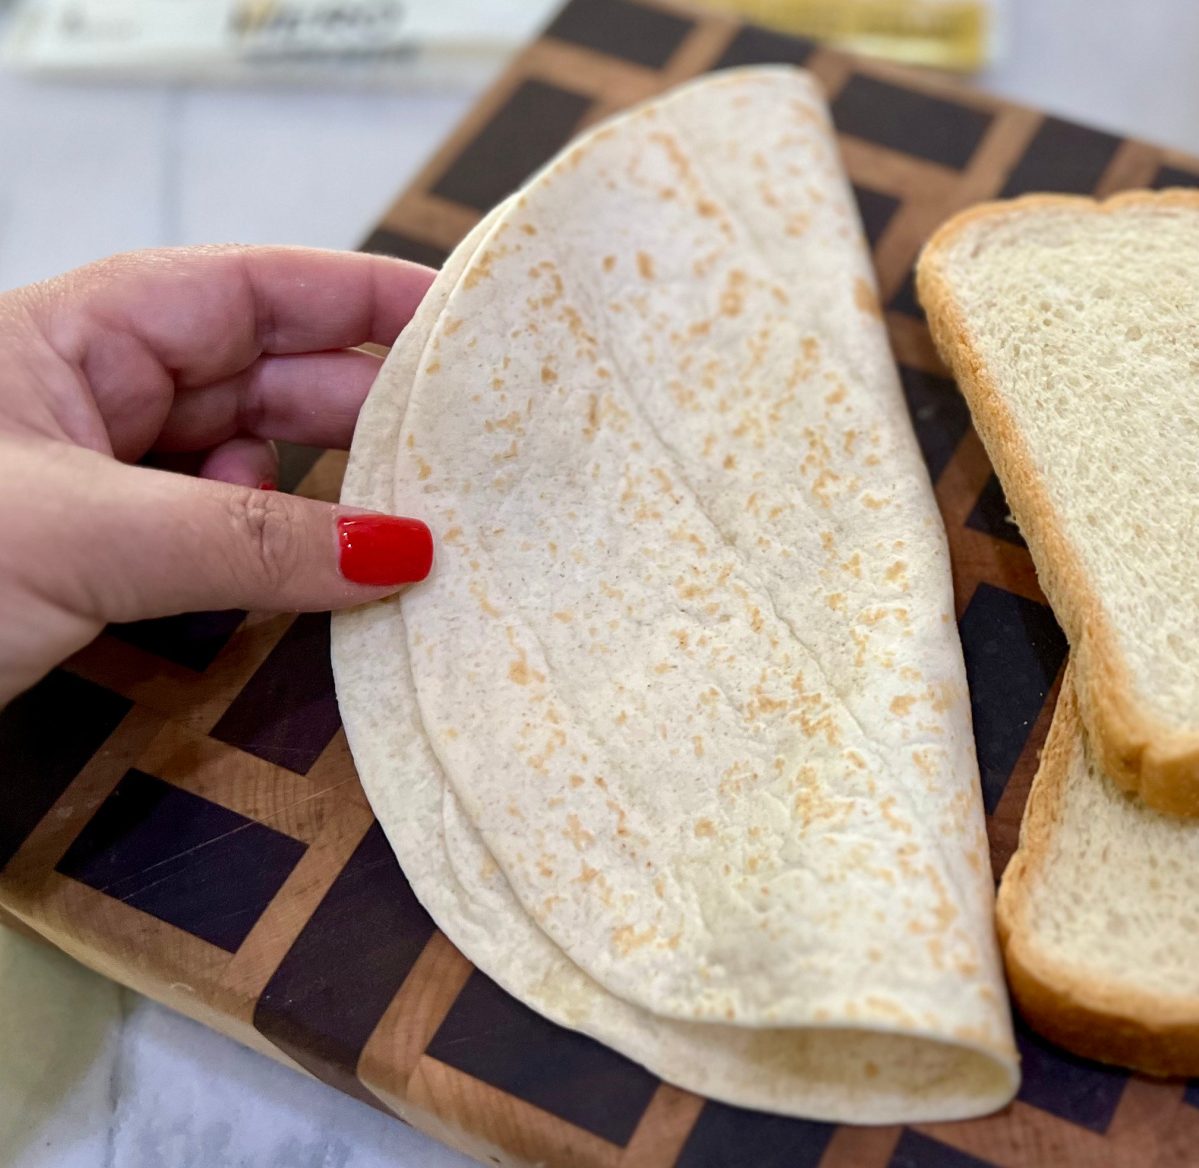 Hand holding a zero carb tortilla from hero bread